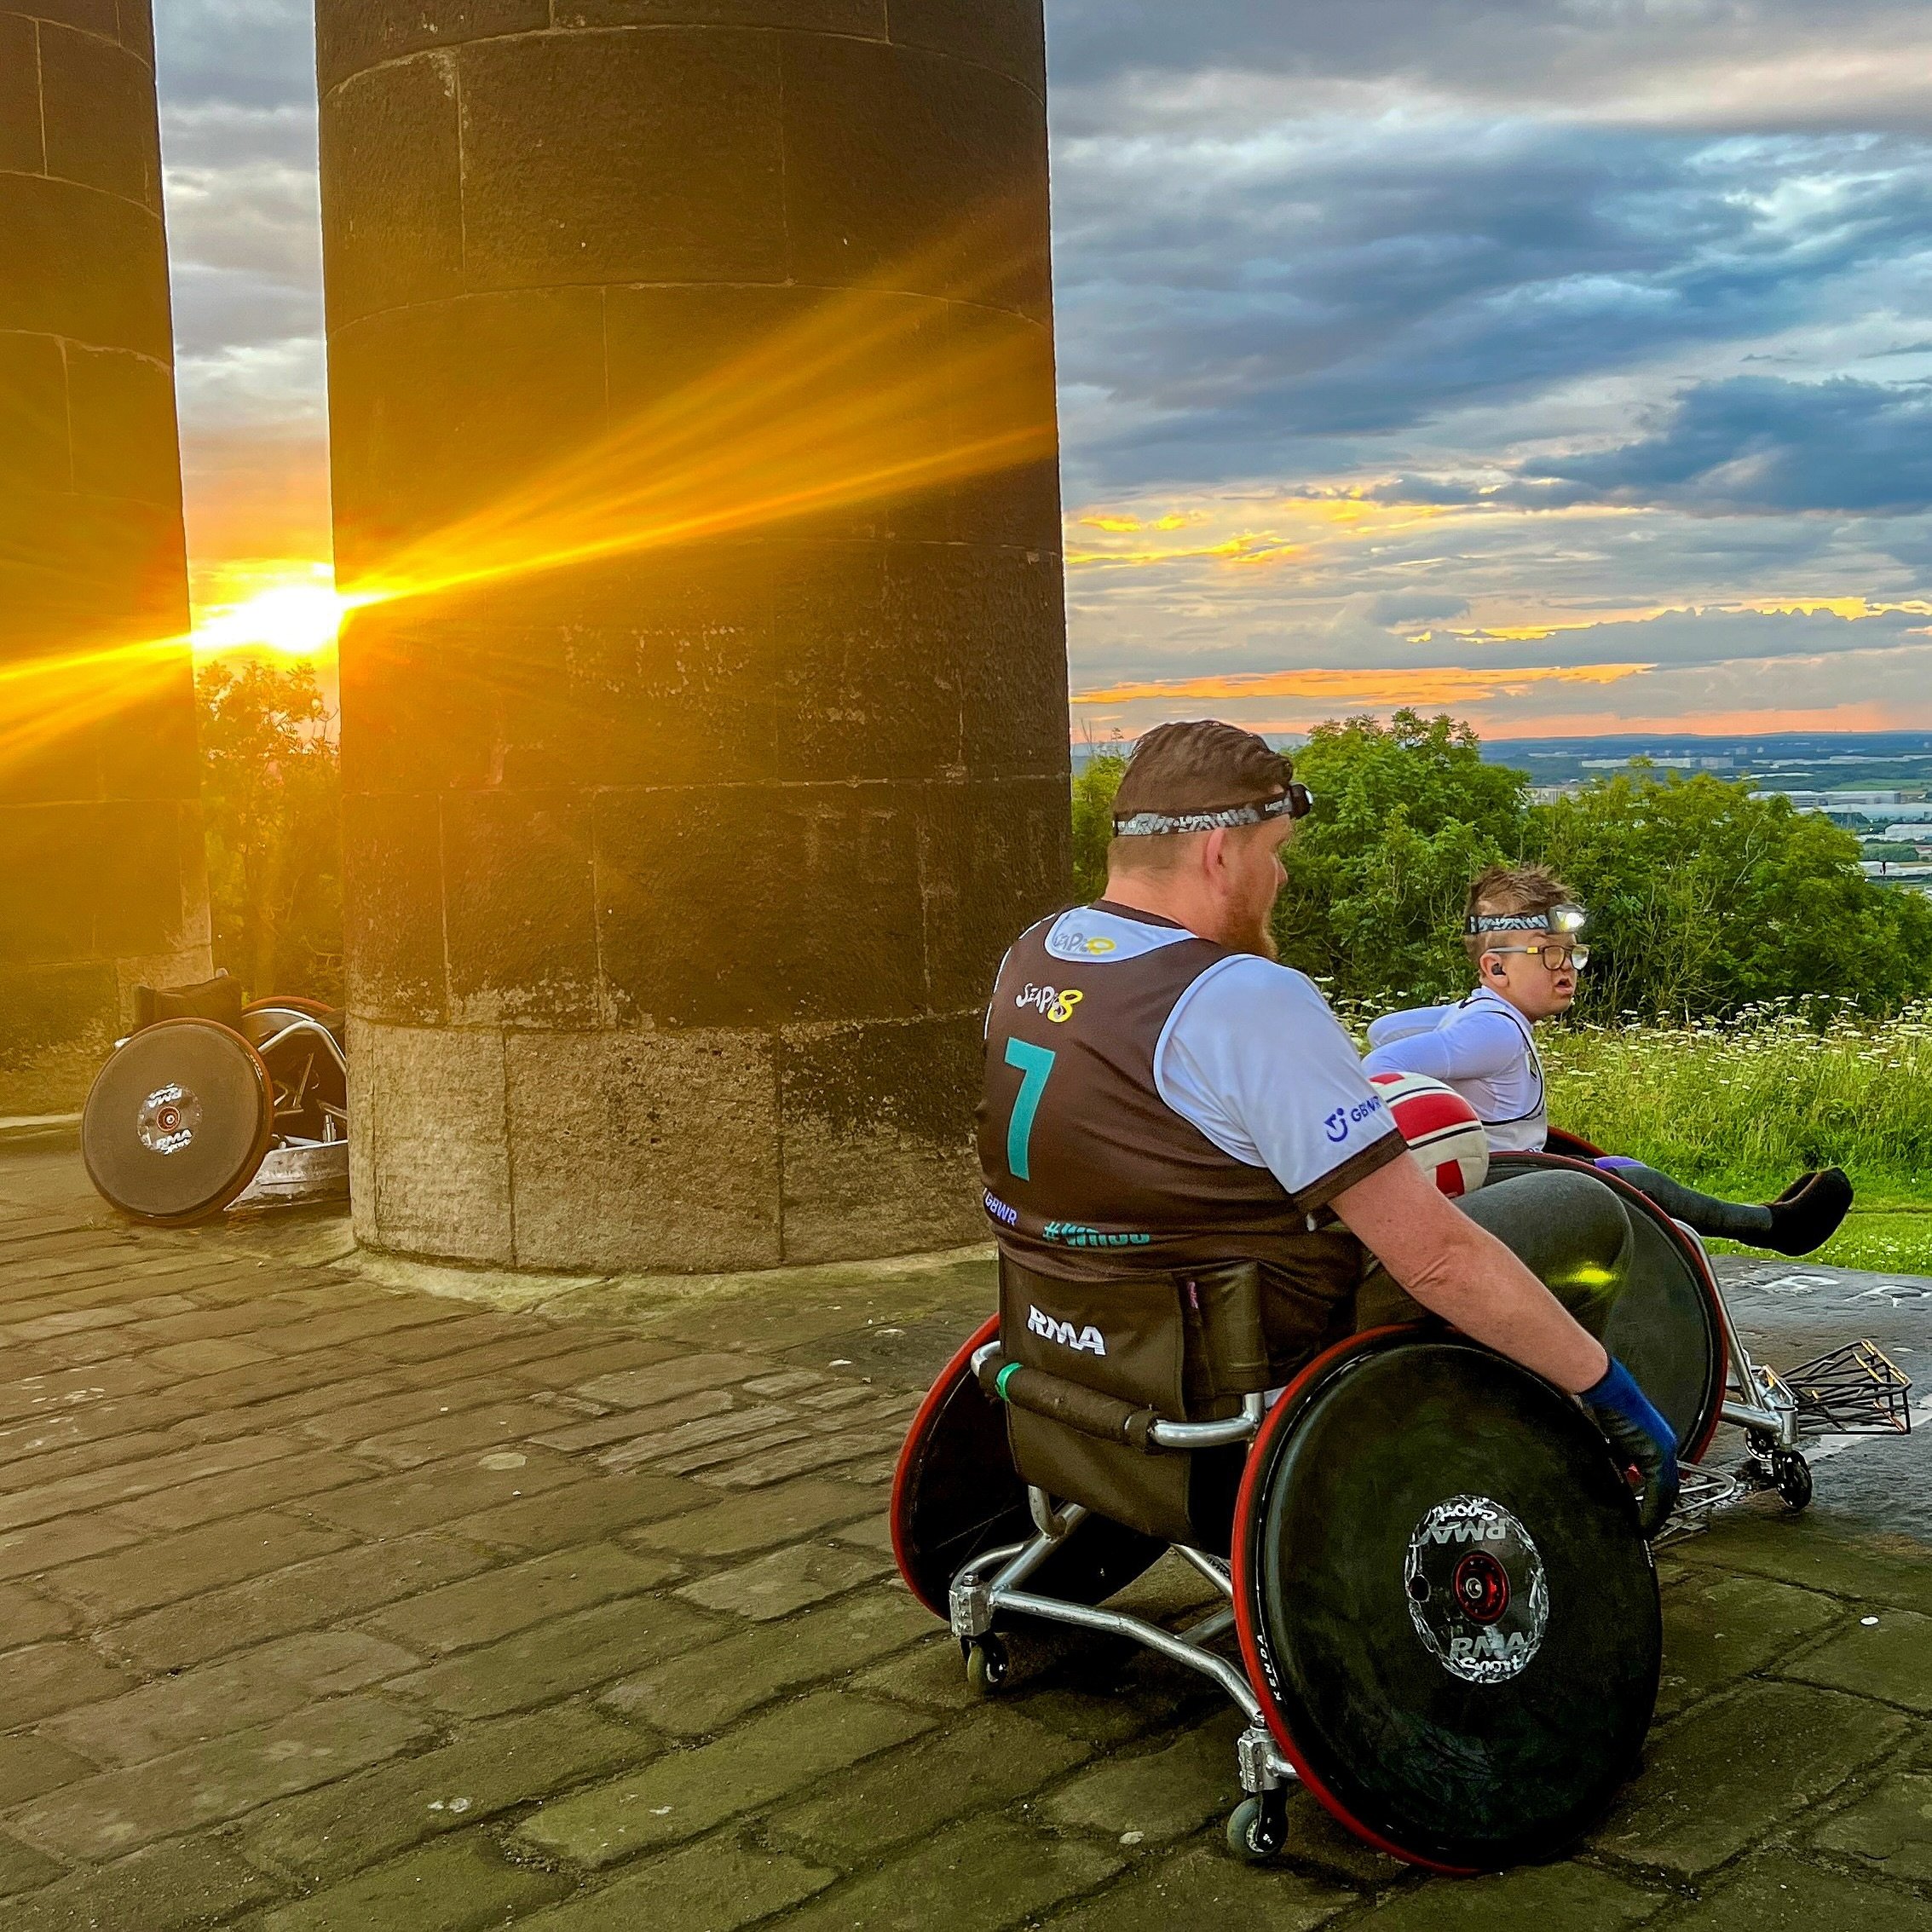 Wheelchair Rugby Rolls into Sunderland!&nbsp;Entry is FREE!

Watch Wheelchair Rugby 5s In Sunderland, at the amazing Beacon of Light.&nbsp;

On Saturday the Allied Mobility Wheelchair Rugby 5s Division One and Two battle it out and on Sunday the Cham